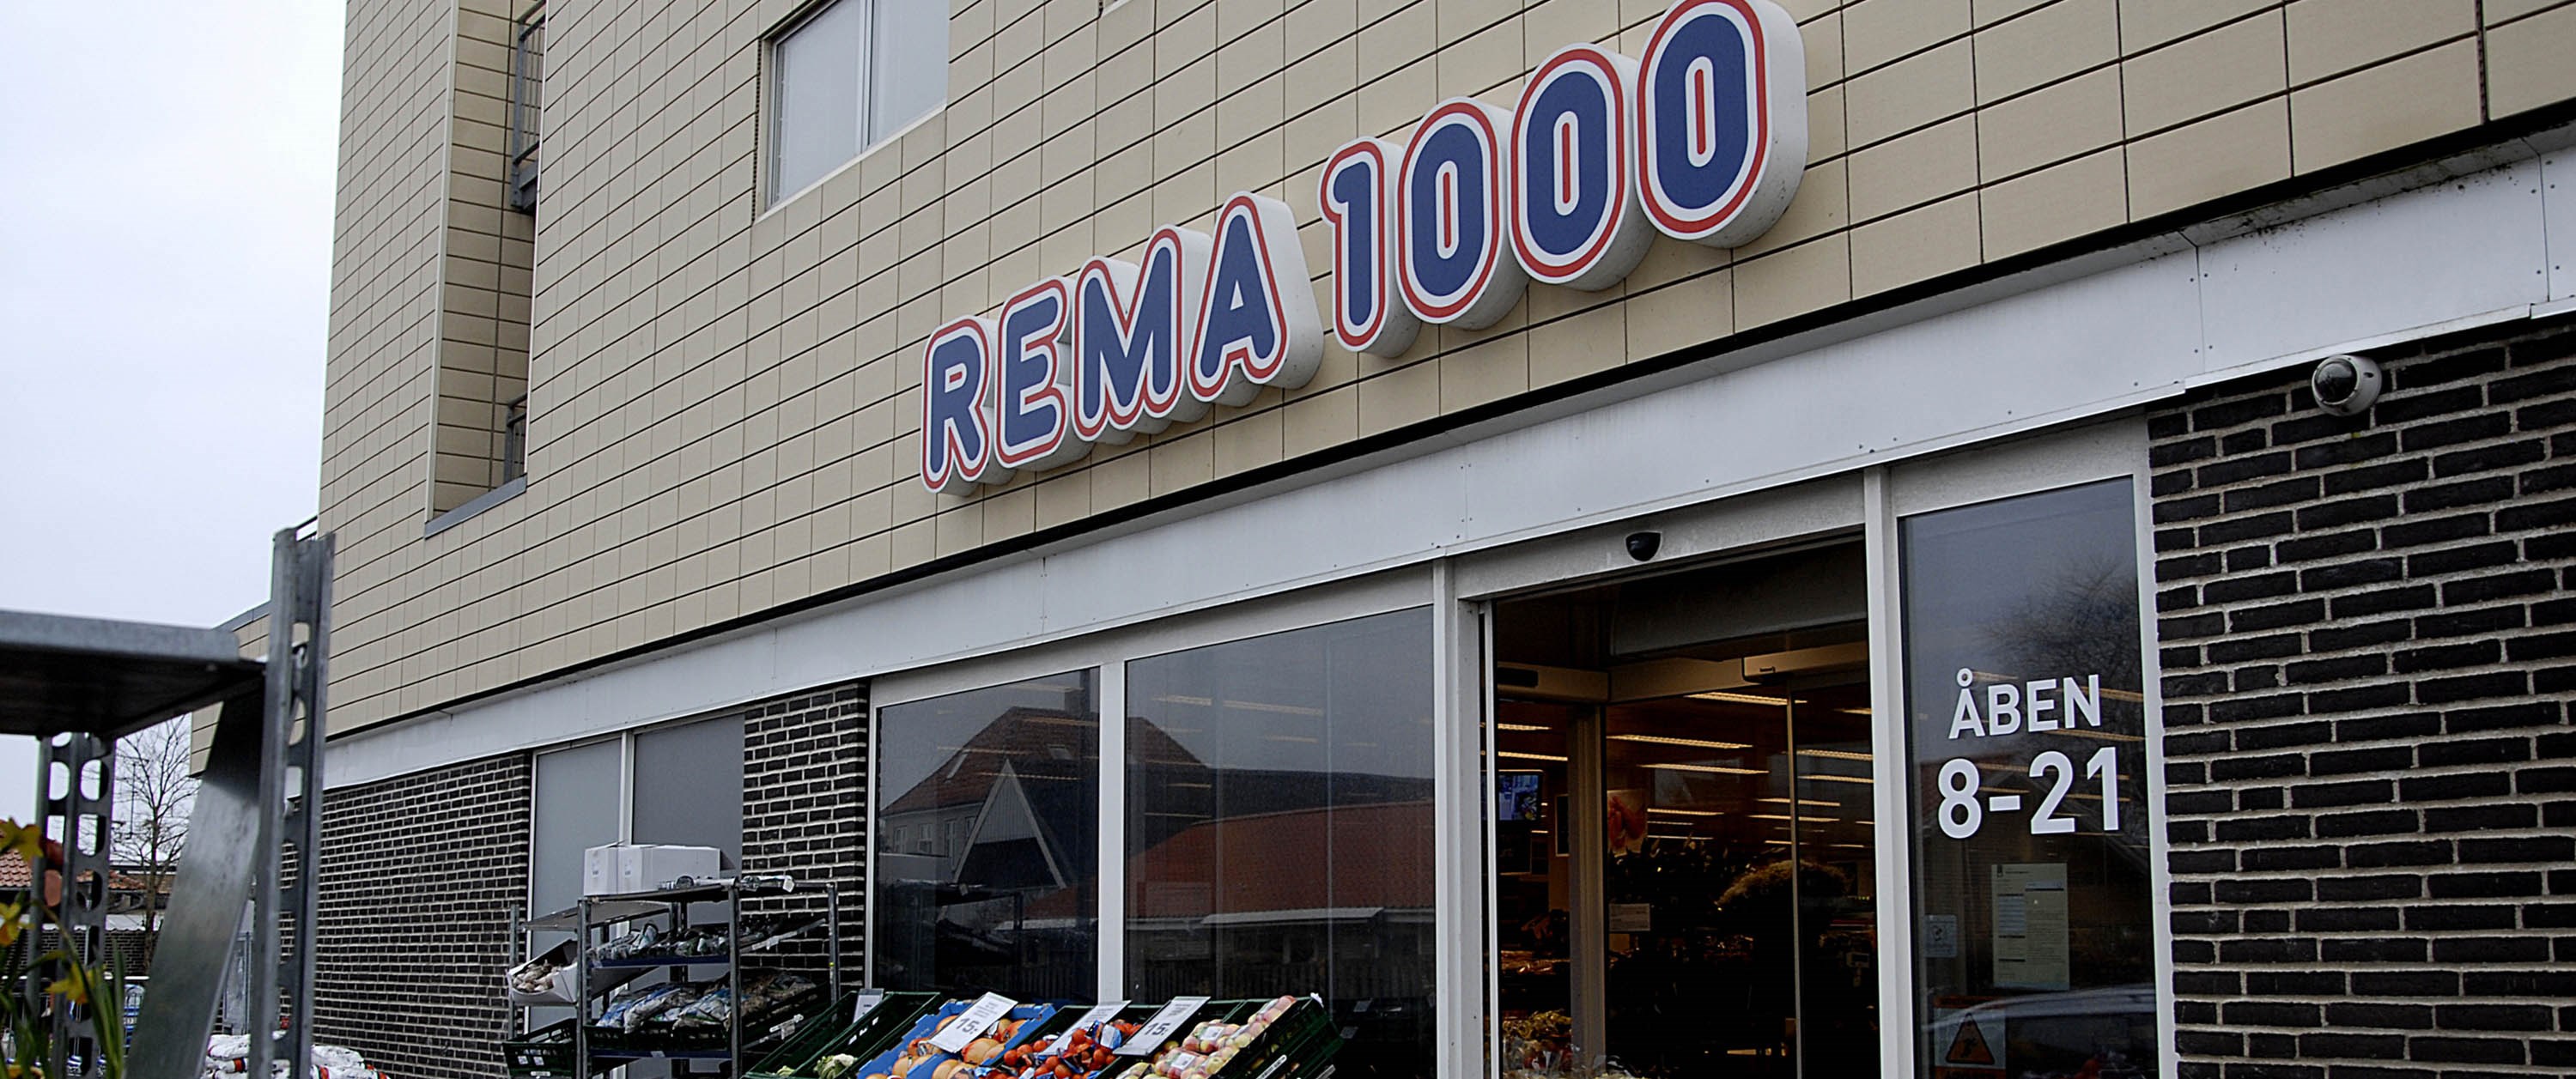 lindring tin Tilstand Denmark: Rema 1000 most sustainable | NHH